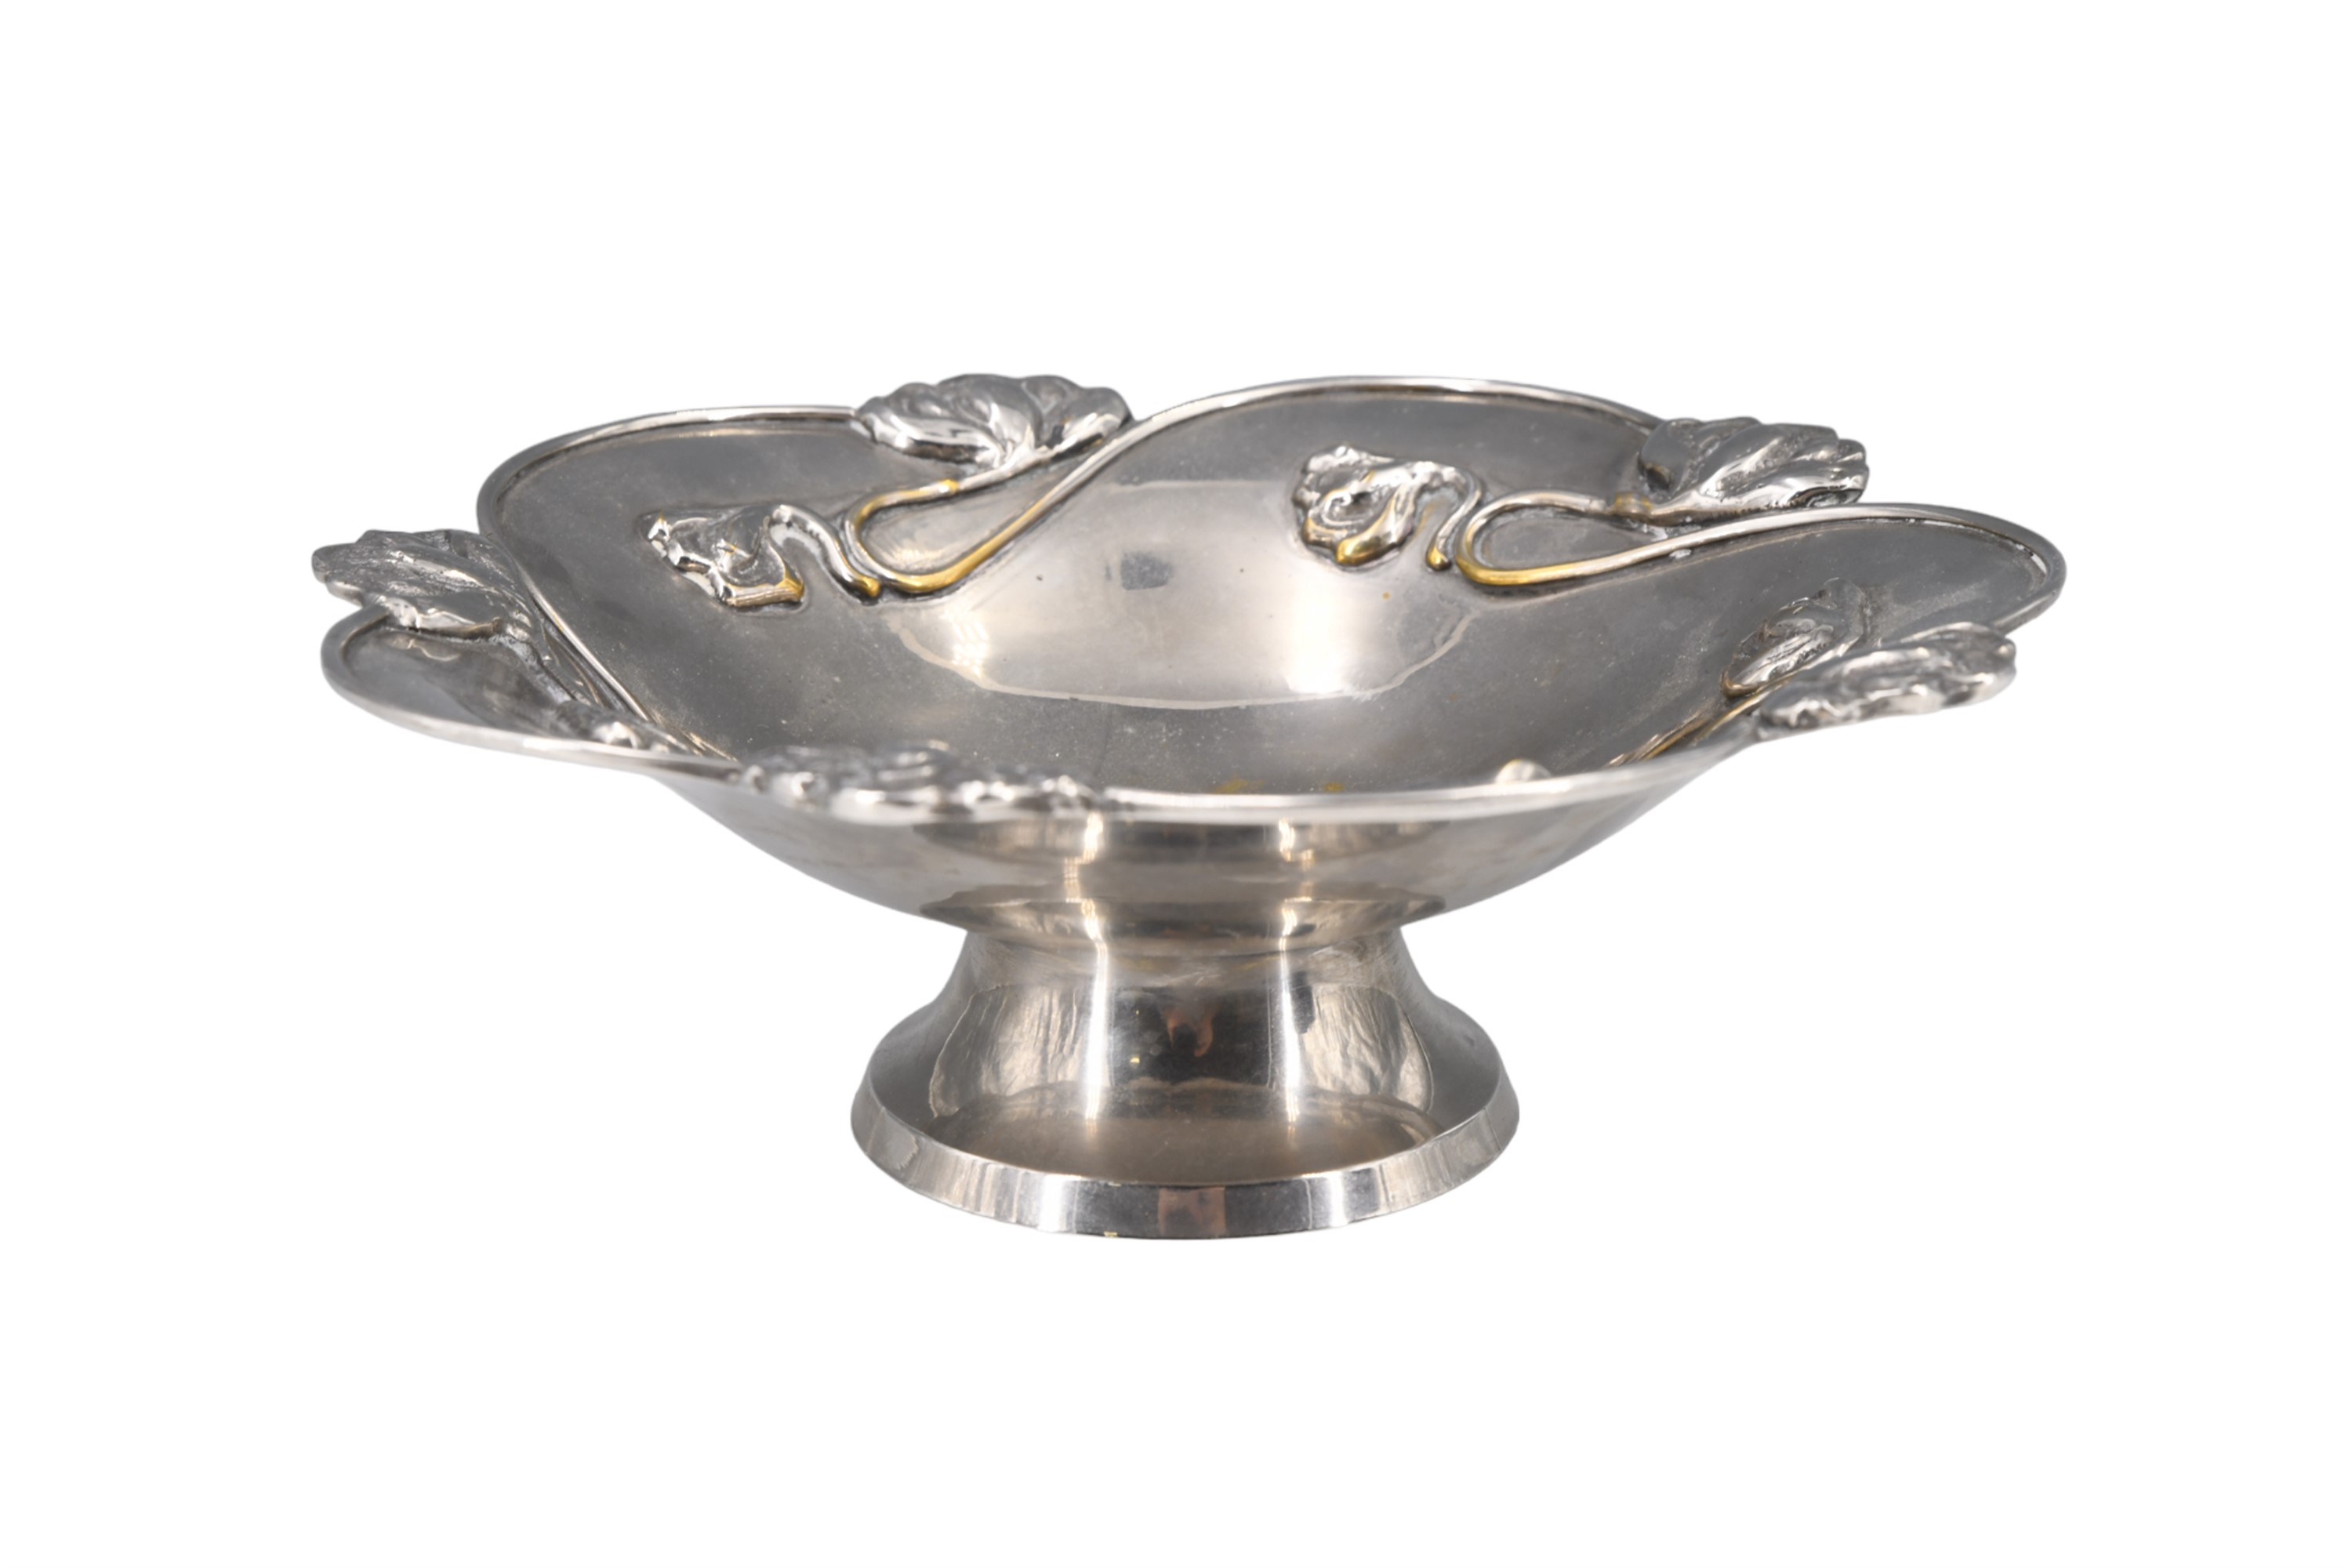 A silver plated Art Nouveau footed dish, 22 cm - Image 2 of 3